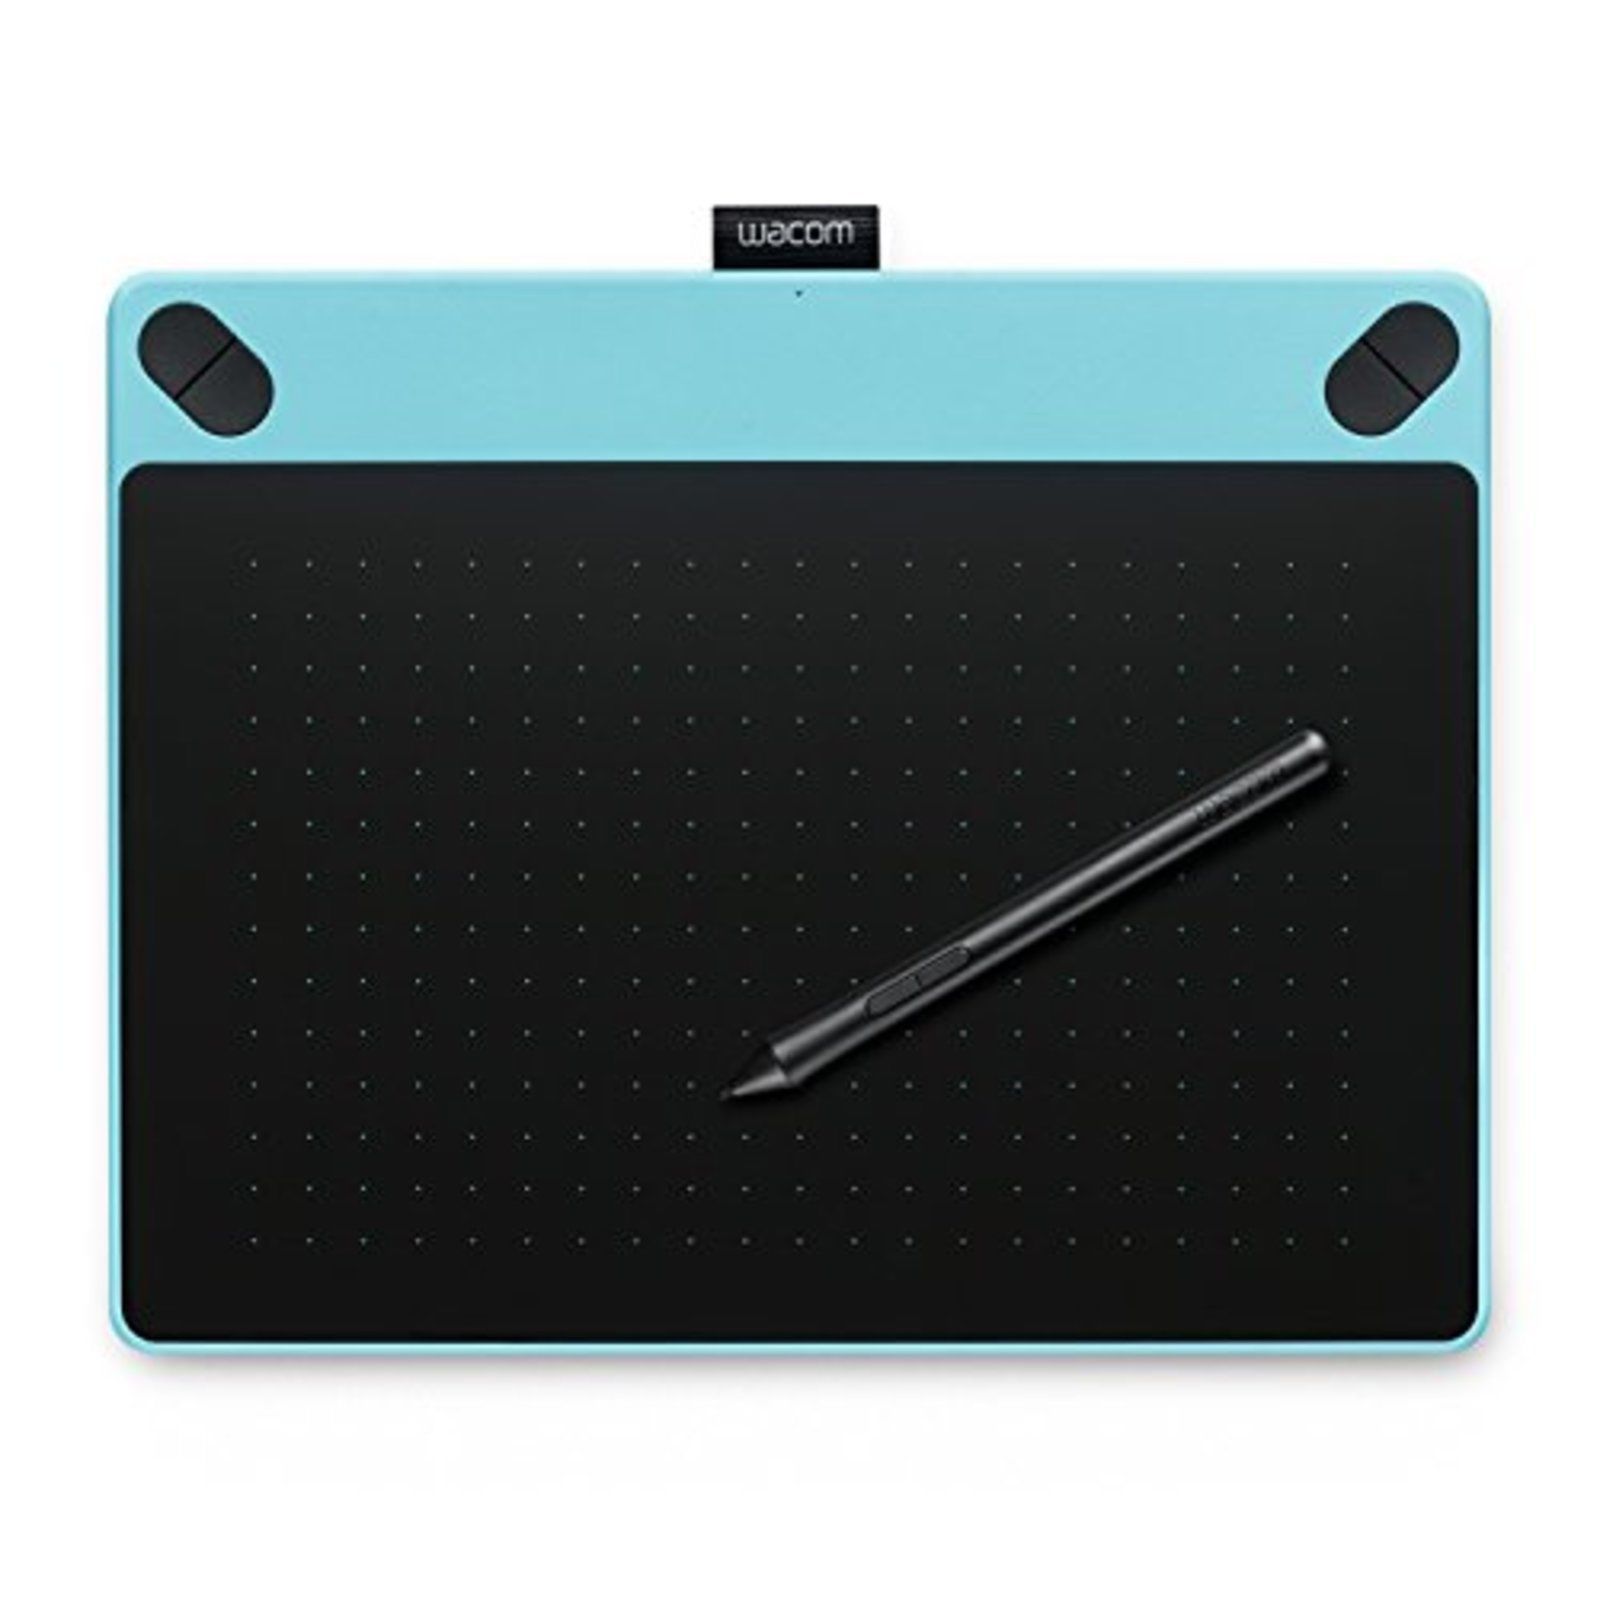 Wacom Intuos Art Pen Tablet for Painting CTH-690/B0 Medium Size Mint Blue F/S